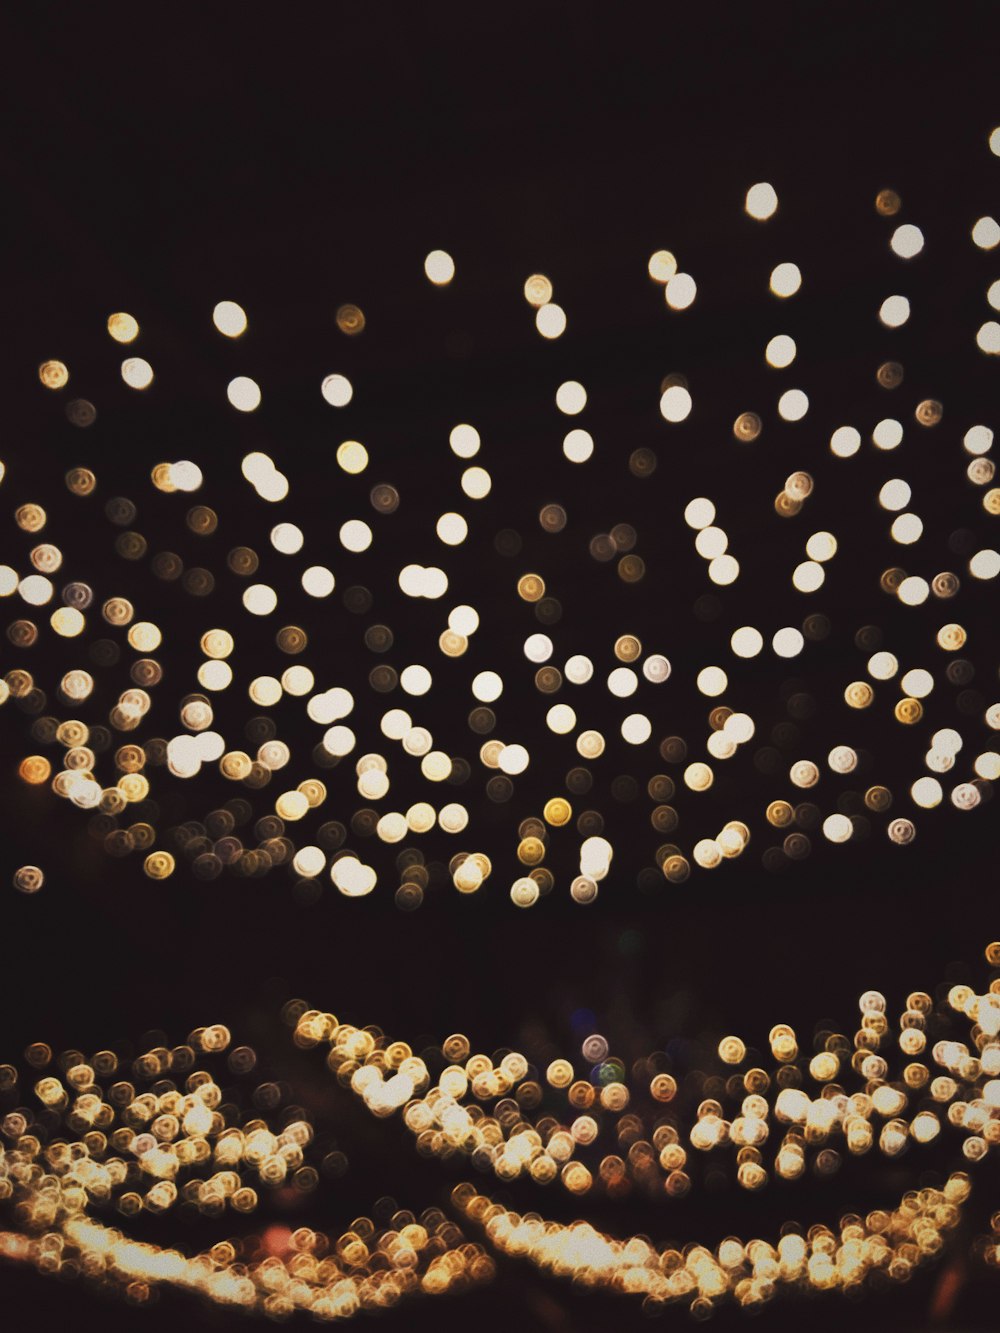 Fairy Lights Pictures | Free Images on